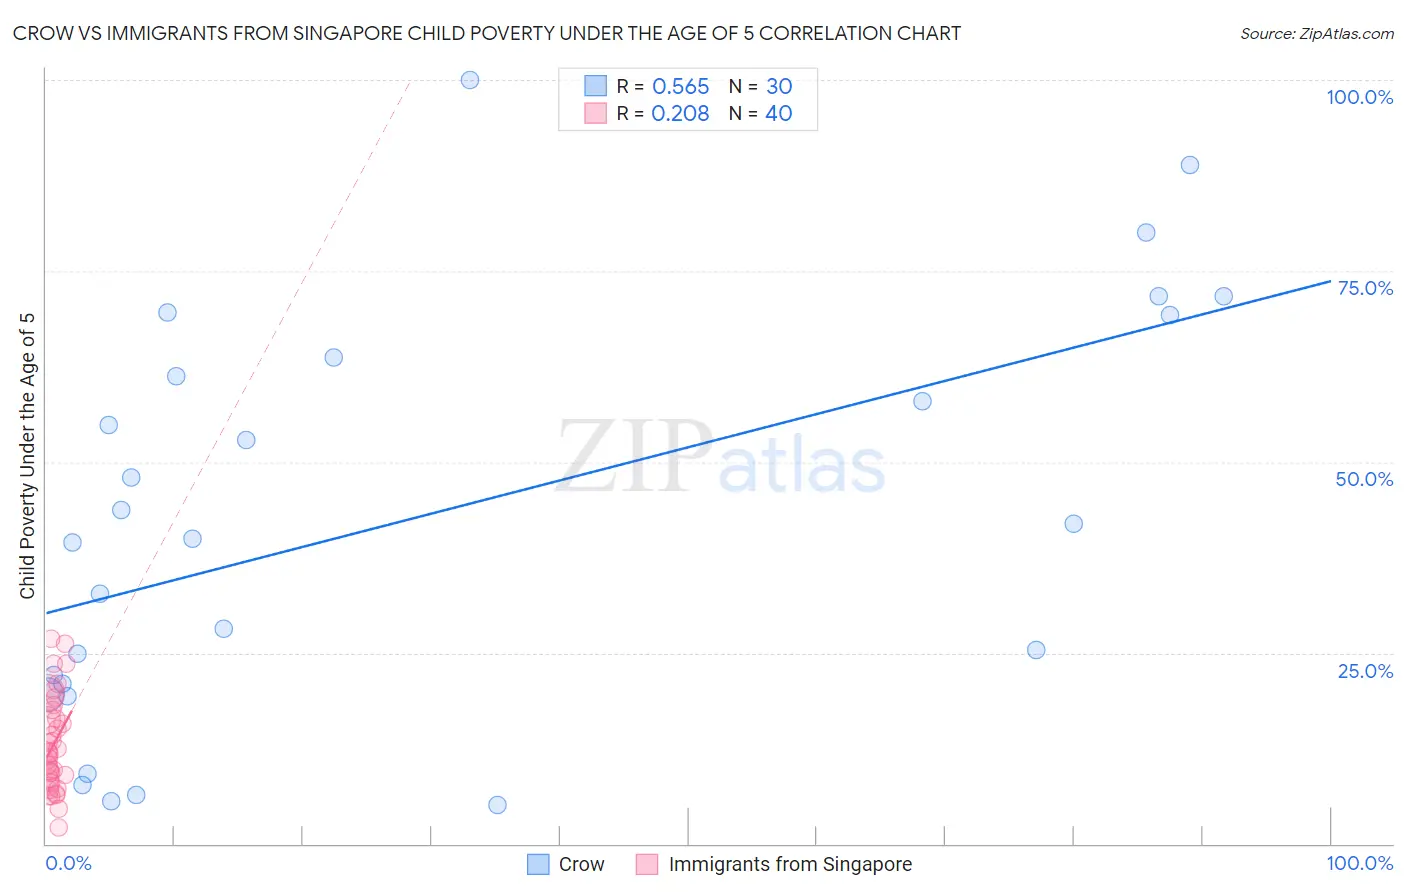 Crow vs Immigrants from Singapore Child Poverty Under the Age of 5